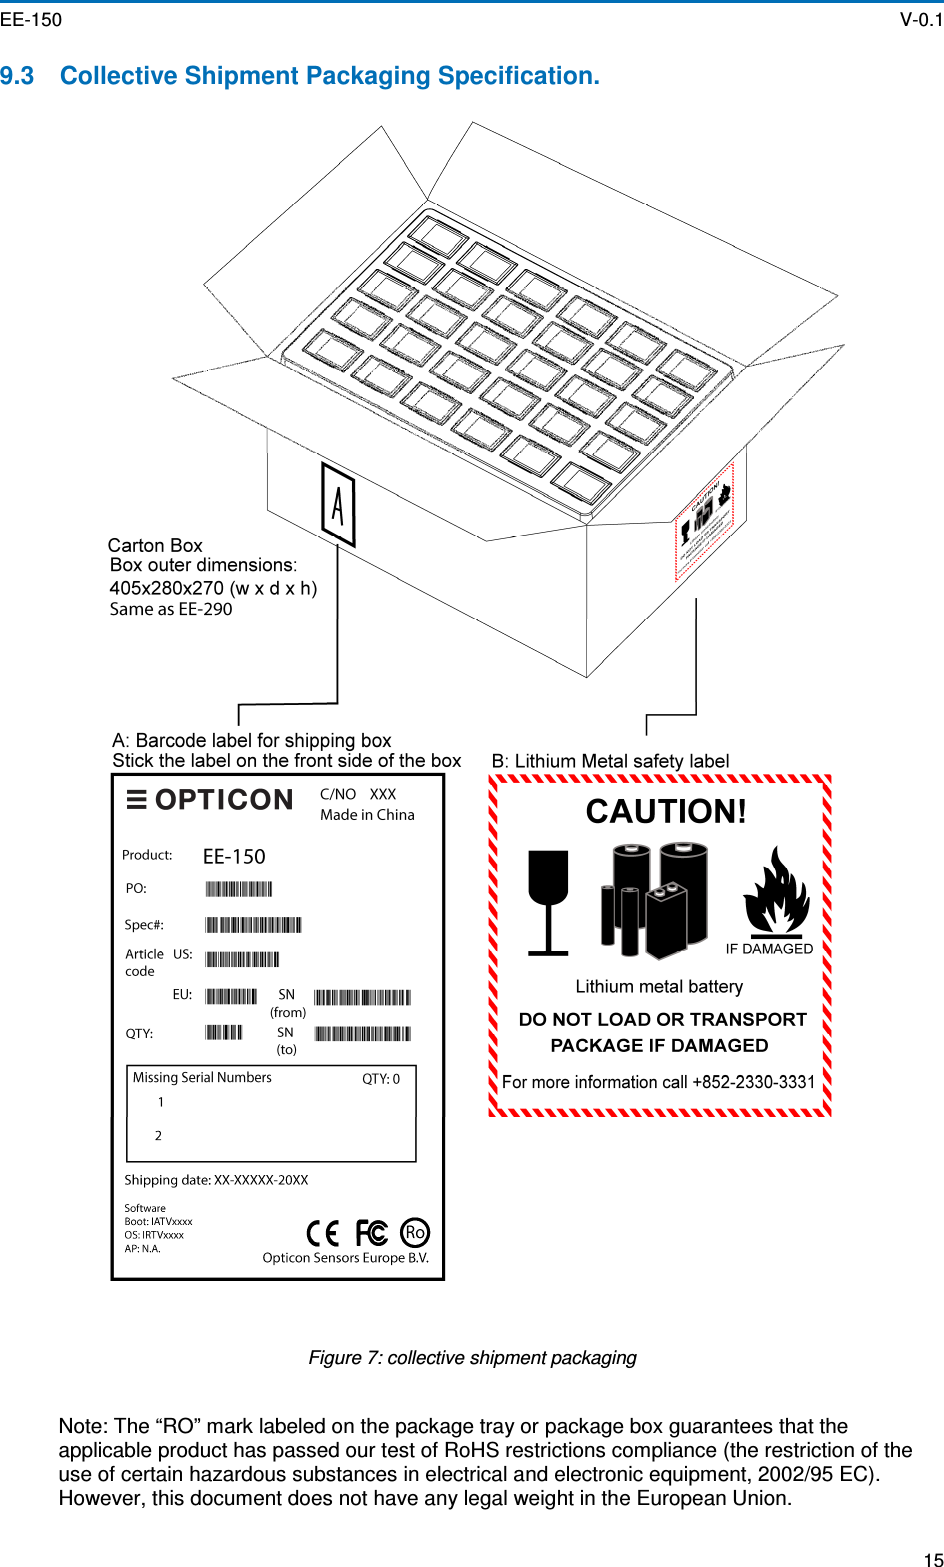  EE-150    V-0.1  15  9.3  Collective Shipment Packaging Specification.     Figure 7: collective shipment packaging  Note: The “RO” mark labeled on the package tray or package box guarantees that the applicable product has passed our test of RoHS restrictions compliance (the restriction of the use of certain hazardous substances in electrical and electronic equipment, 2002/95 EC). However, this document does not have any legal weight in the European Union. 